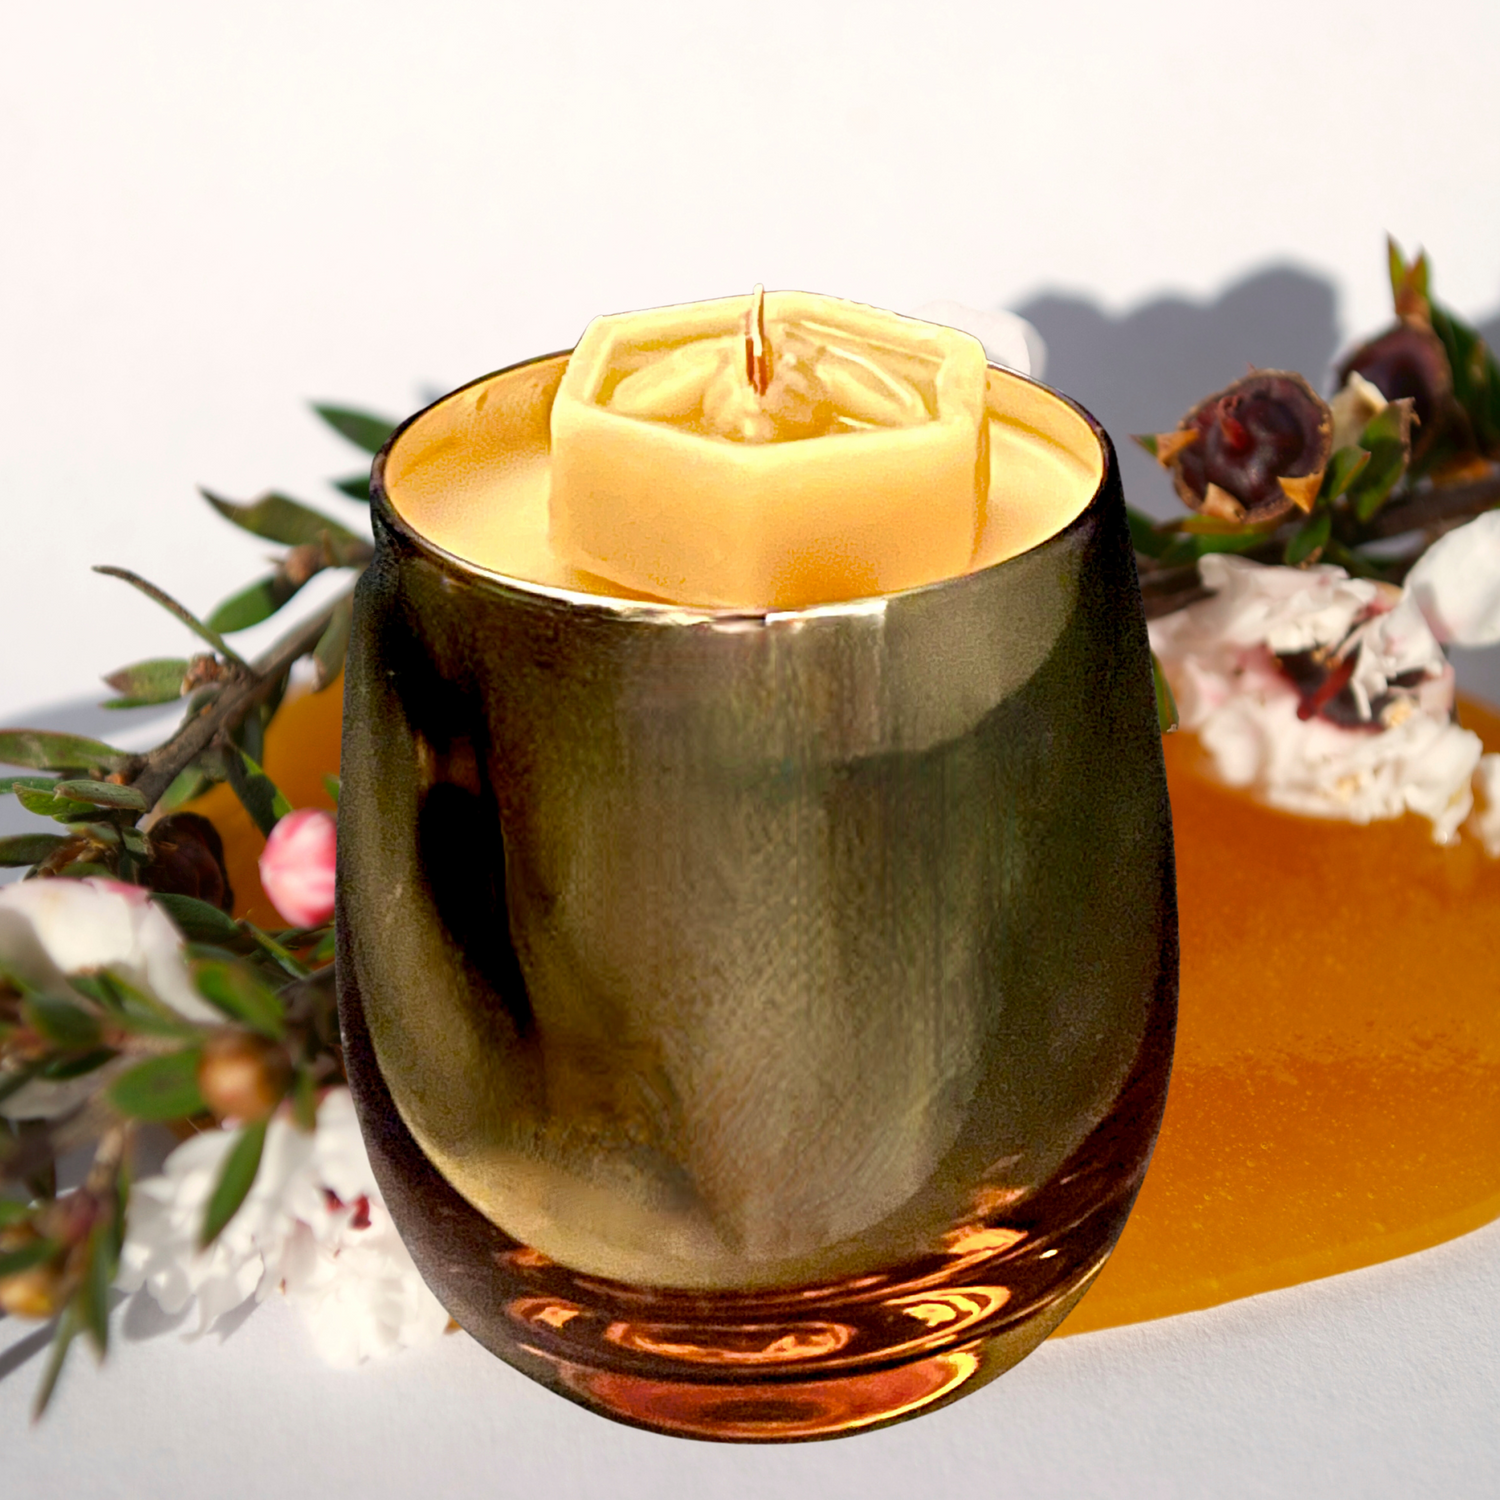 Alchemy 7 | Apian - 12 oz Beeswax Candle - Autumn/Winter Candle